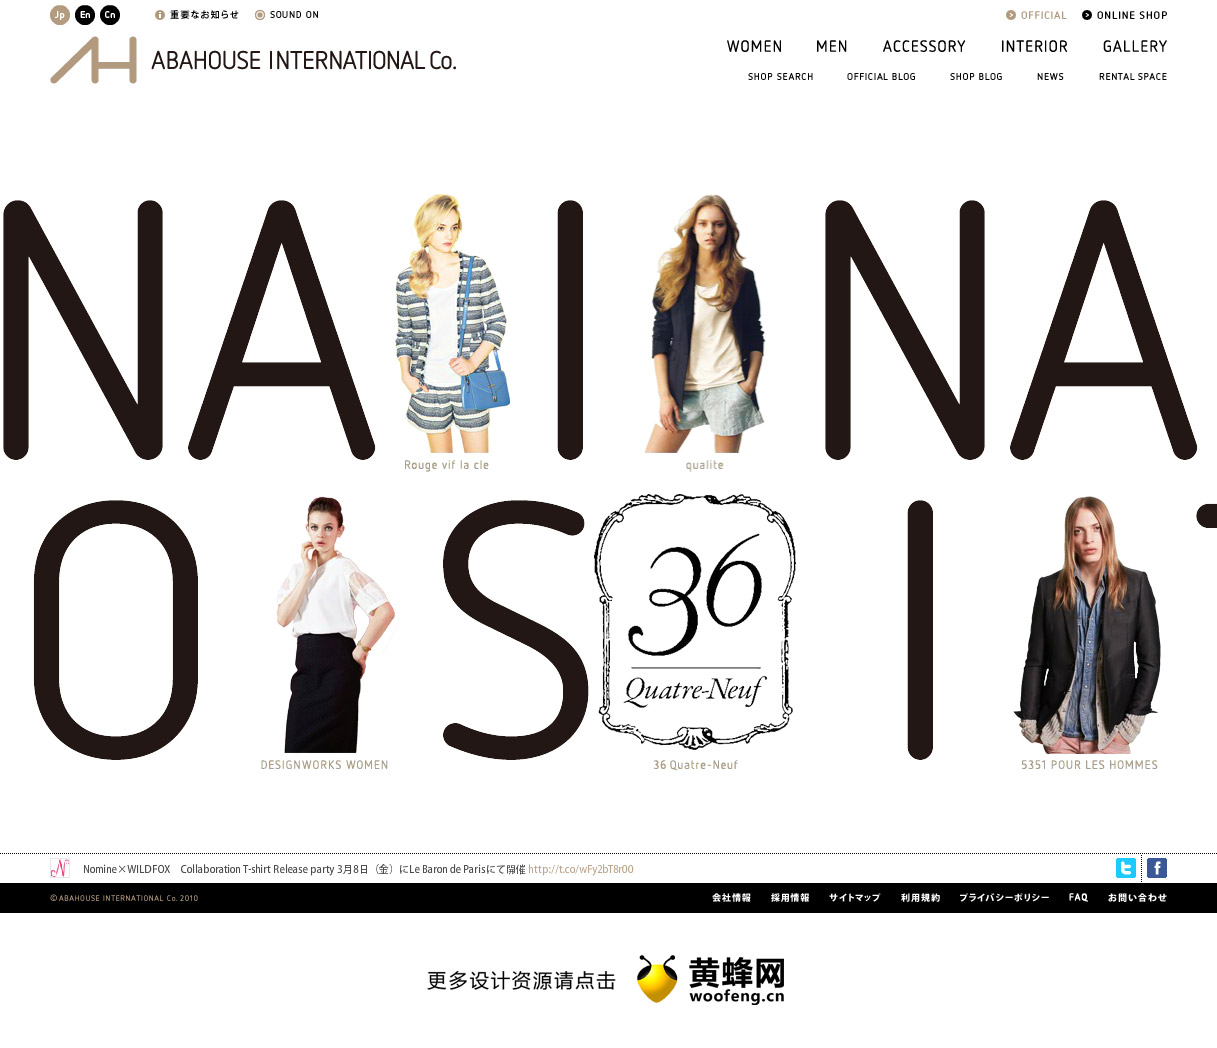 ABAHOUSE INTERNATIONAL CO。服装网站，来源自黄蜂网https://woofeng.cn/web/